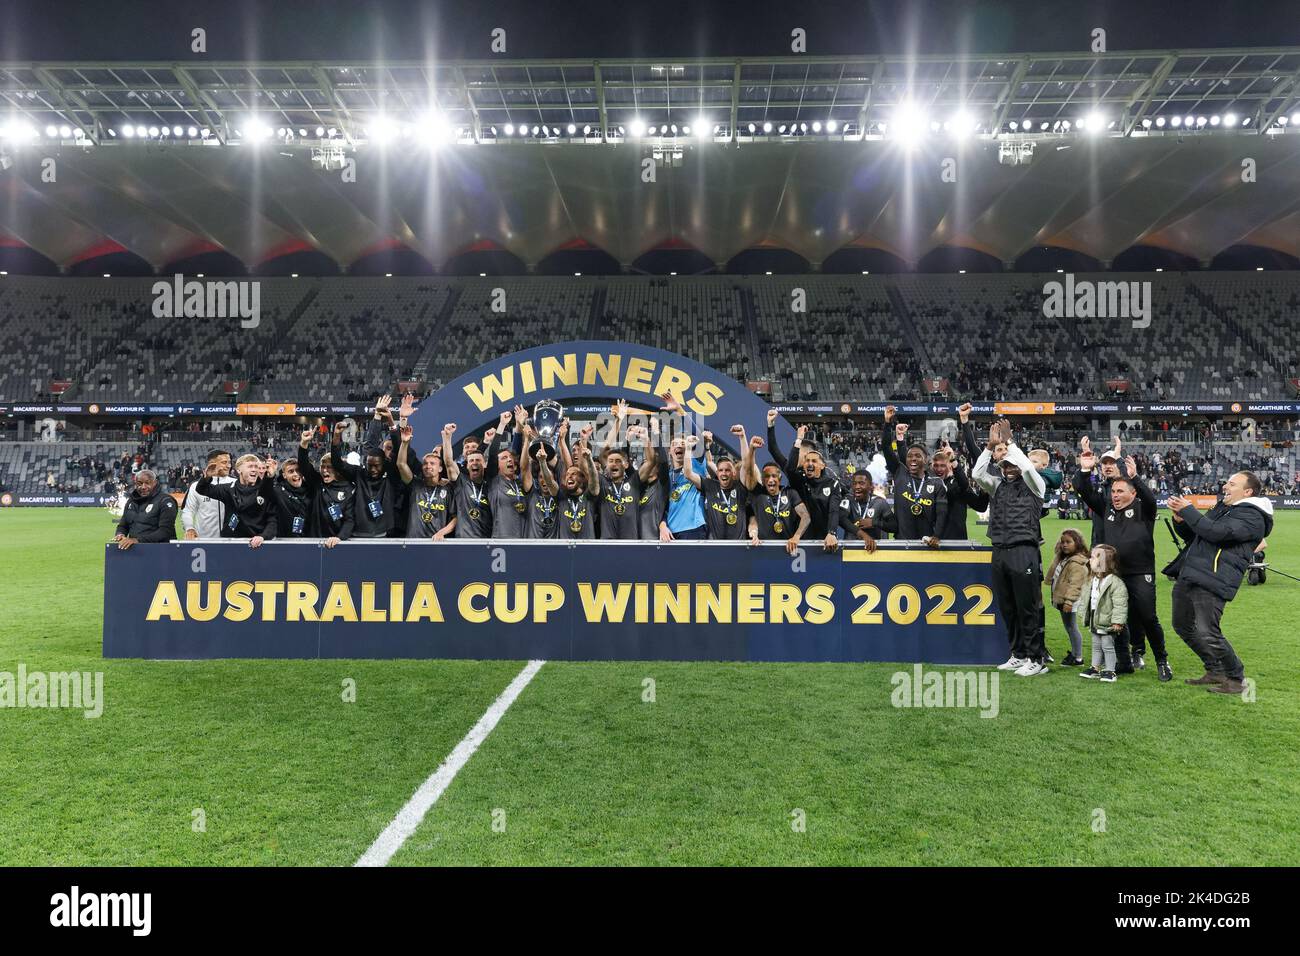 SYDNEY, AUSTRALIA - OCTOBER 1: Macarthur FC celebrate winning after the Australia Cup Final match between Sydney United 58 FC and Macarthur FC at CommBank Stadium on October 1, 2022 in Sydney, Australia Credit: IOIO IMAGES/Alamy Live News Stock Photo